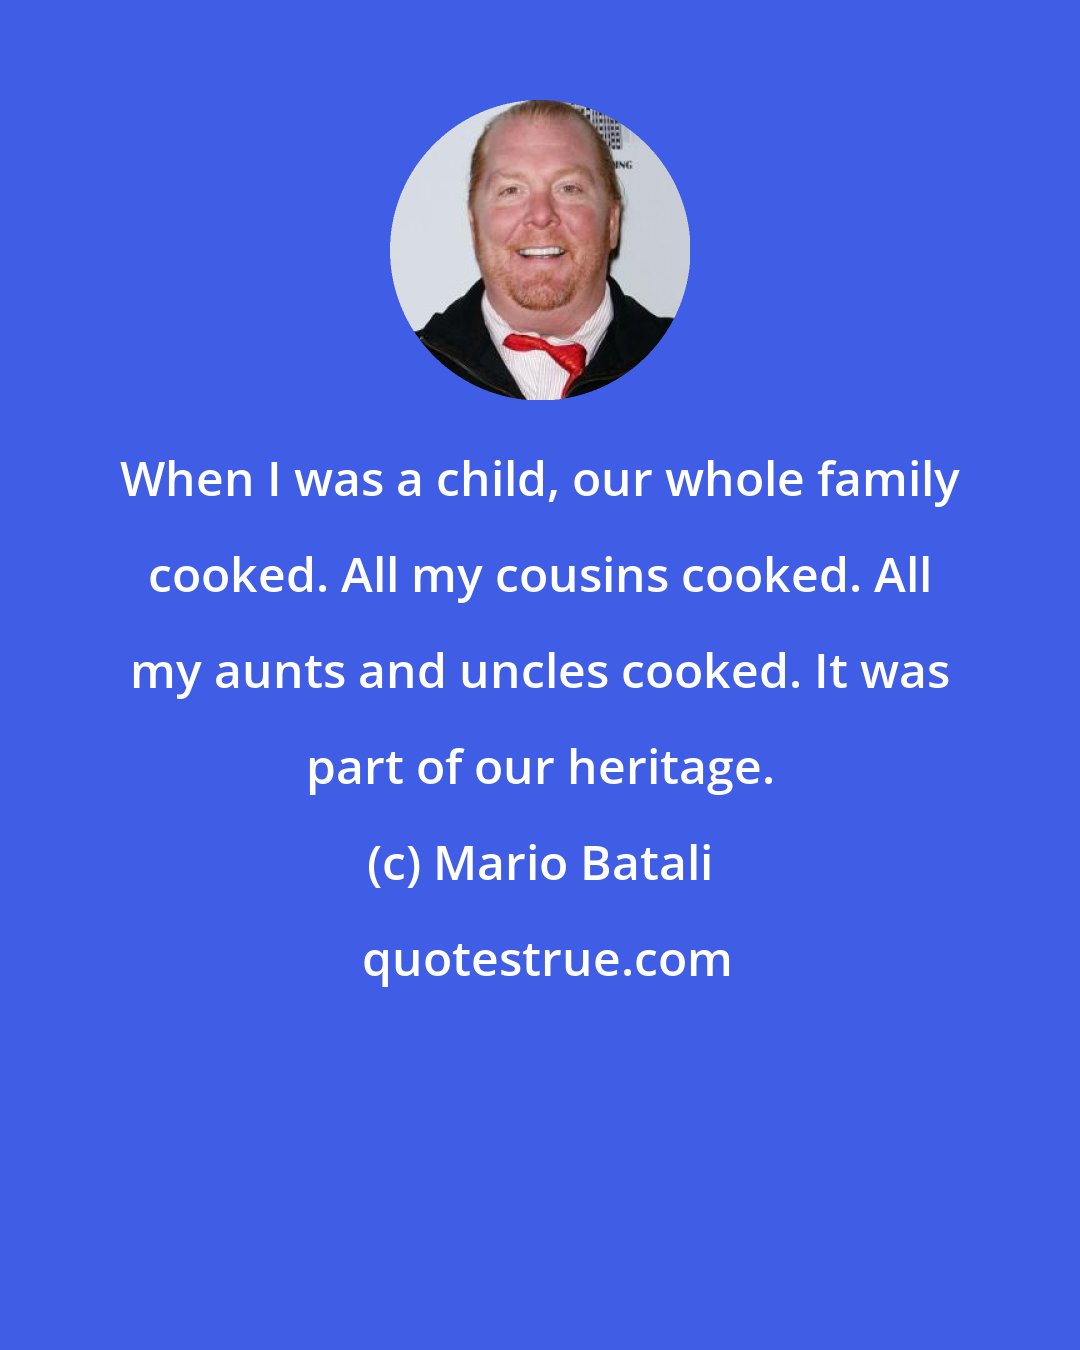 Mario Batali: When I was a child, our whole family cooked. All my cousins cooked. All my aunts and uncles cooked. It was part of our heritage.